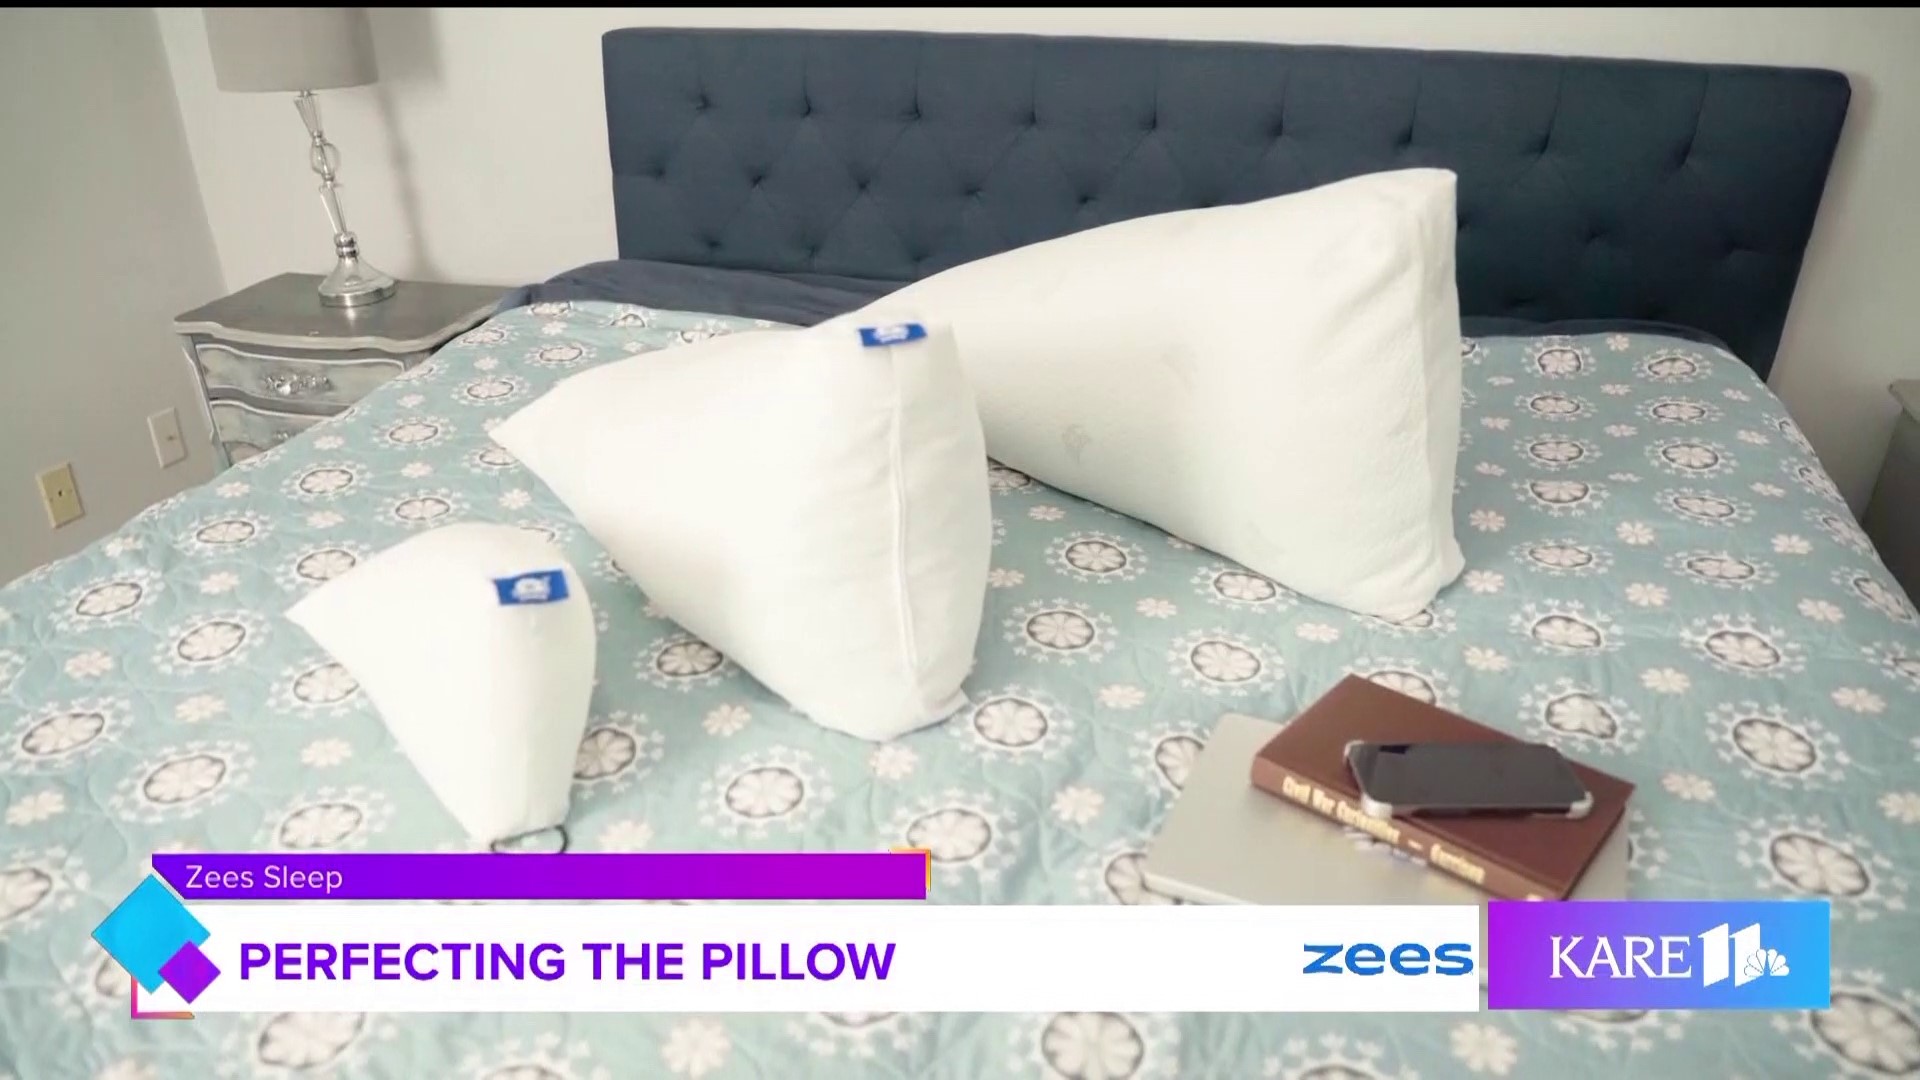 In this paid segment, Zees Sleep joins Minnesota and Company to discuss how you can get better sleep with their uniquely designed pillows!